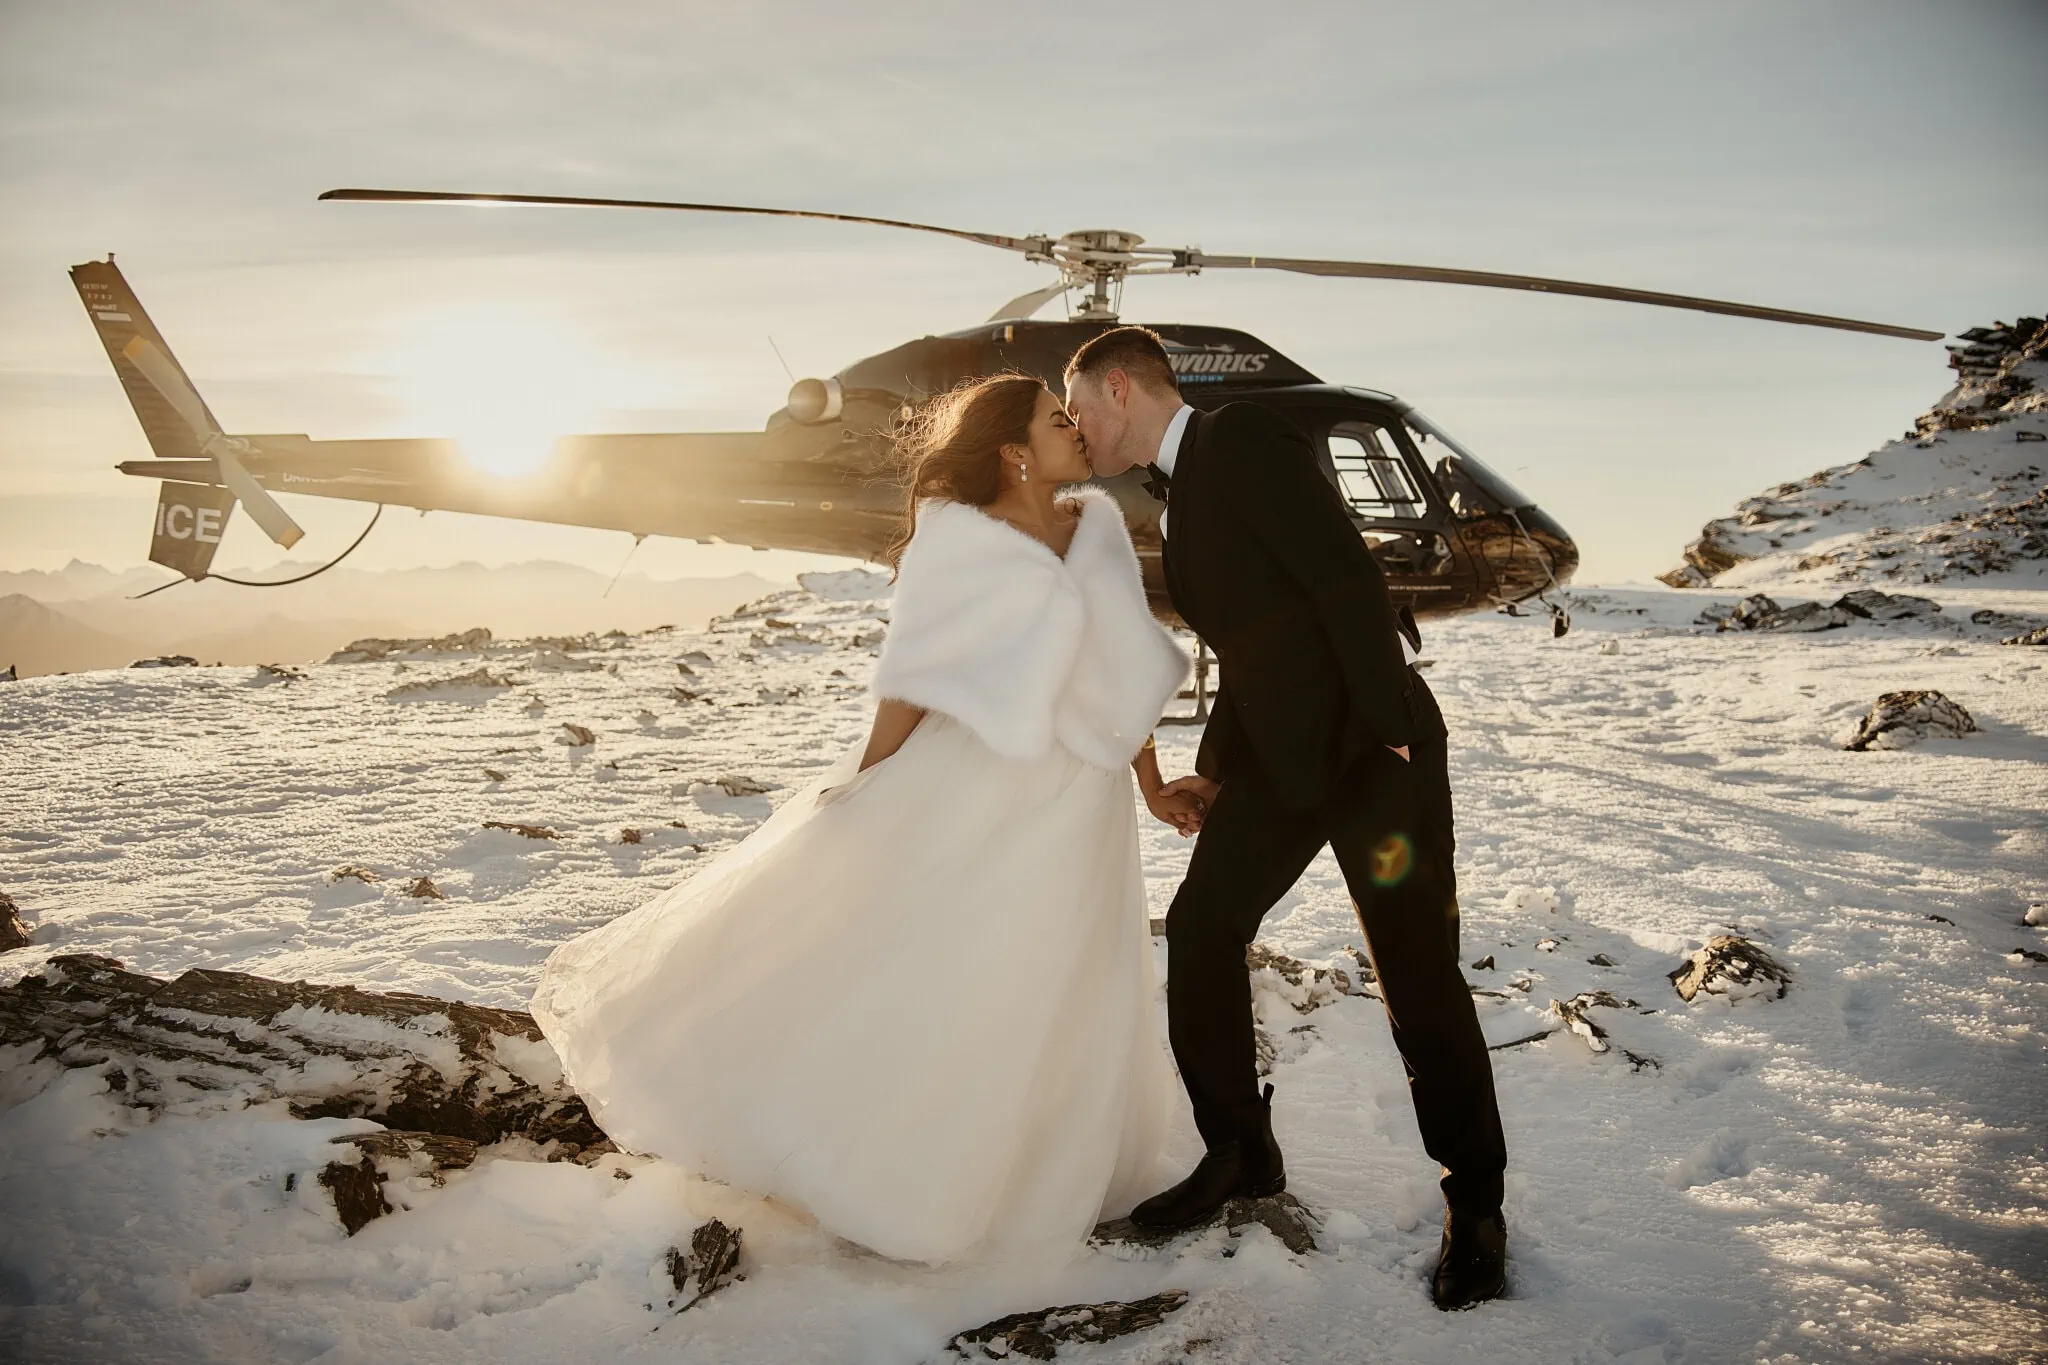 Queenstown New Zealand Elopement Wedding Photographer - Amy and Callum have a romantic Queenstown Heli pre-wedding shoot, captured in a kiss in front of a helicopter.